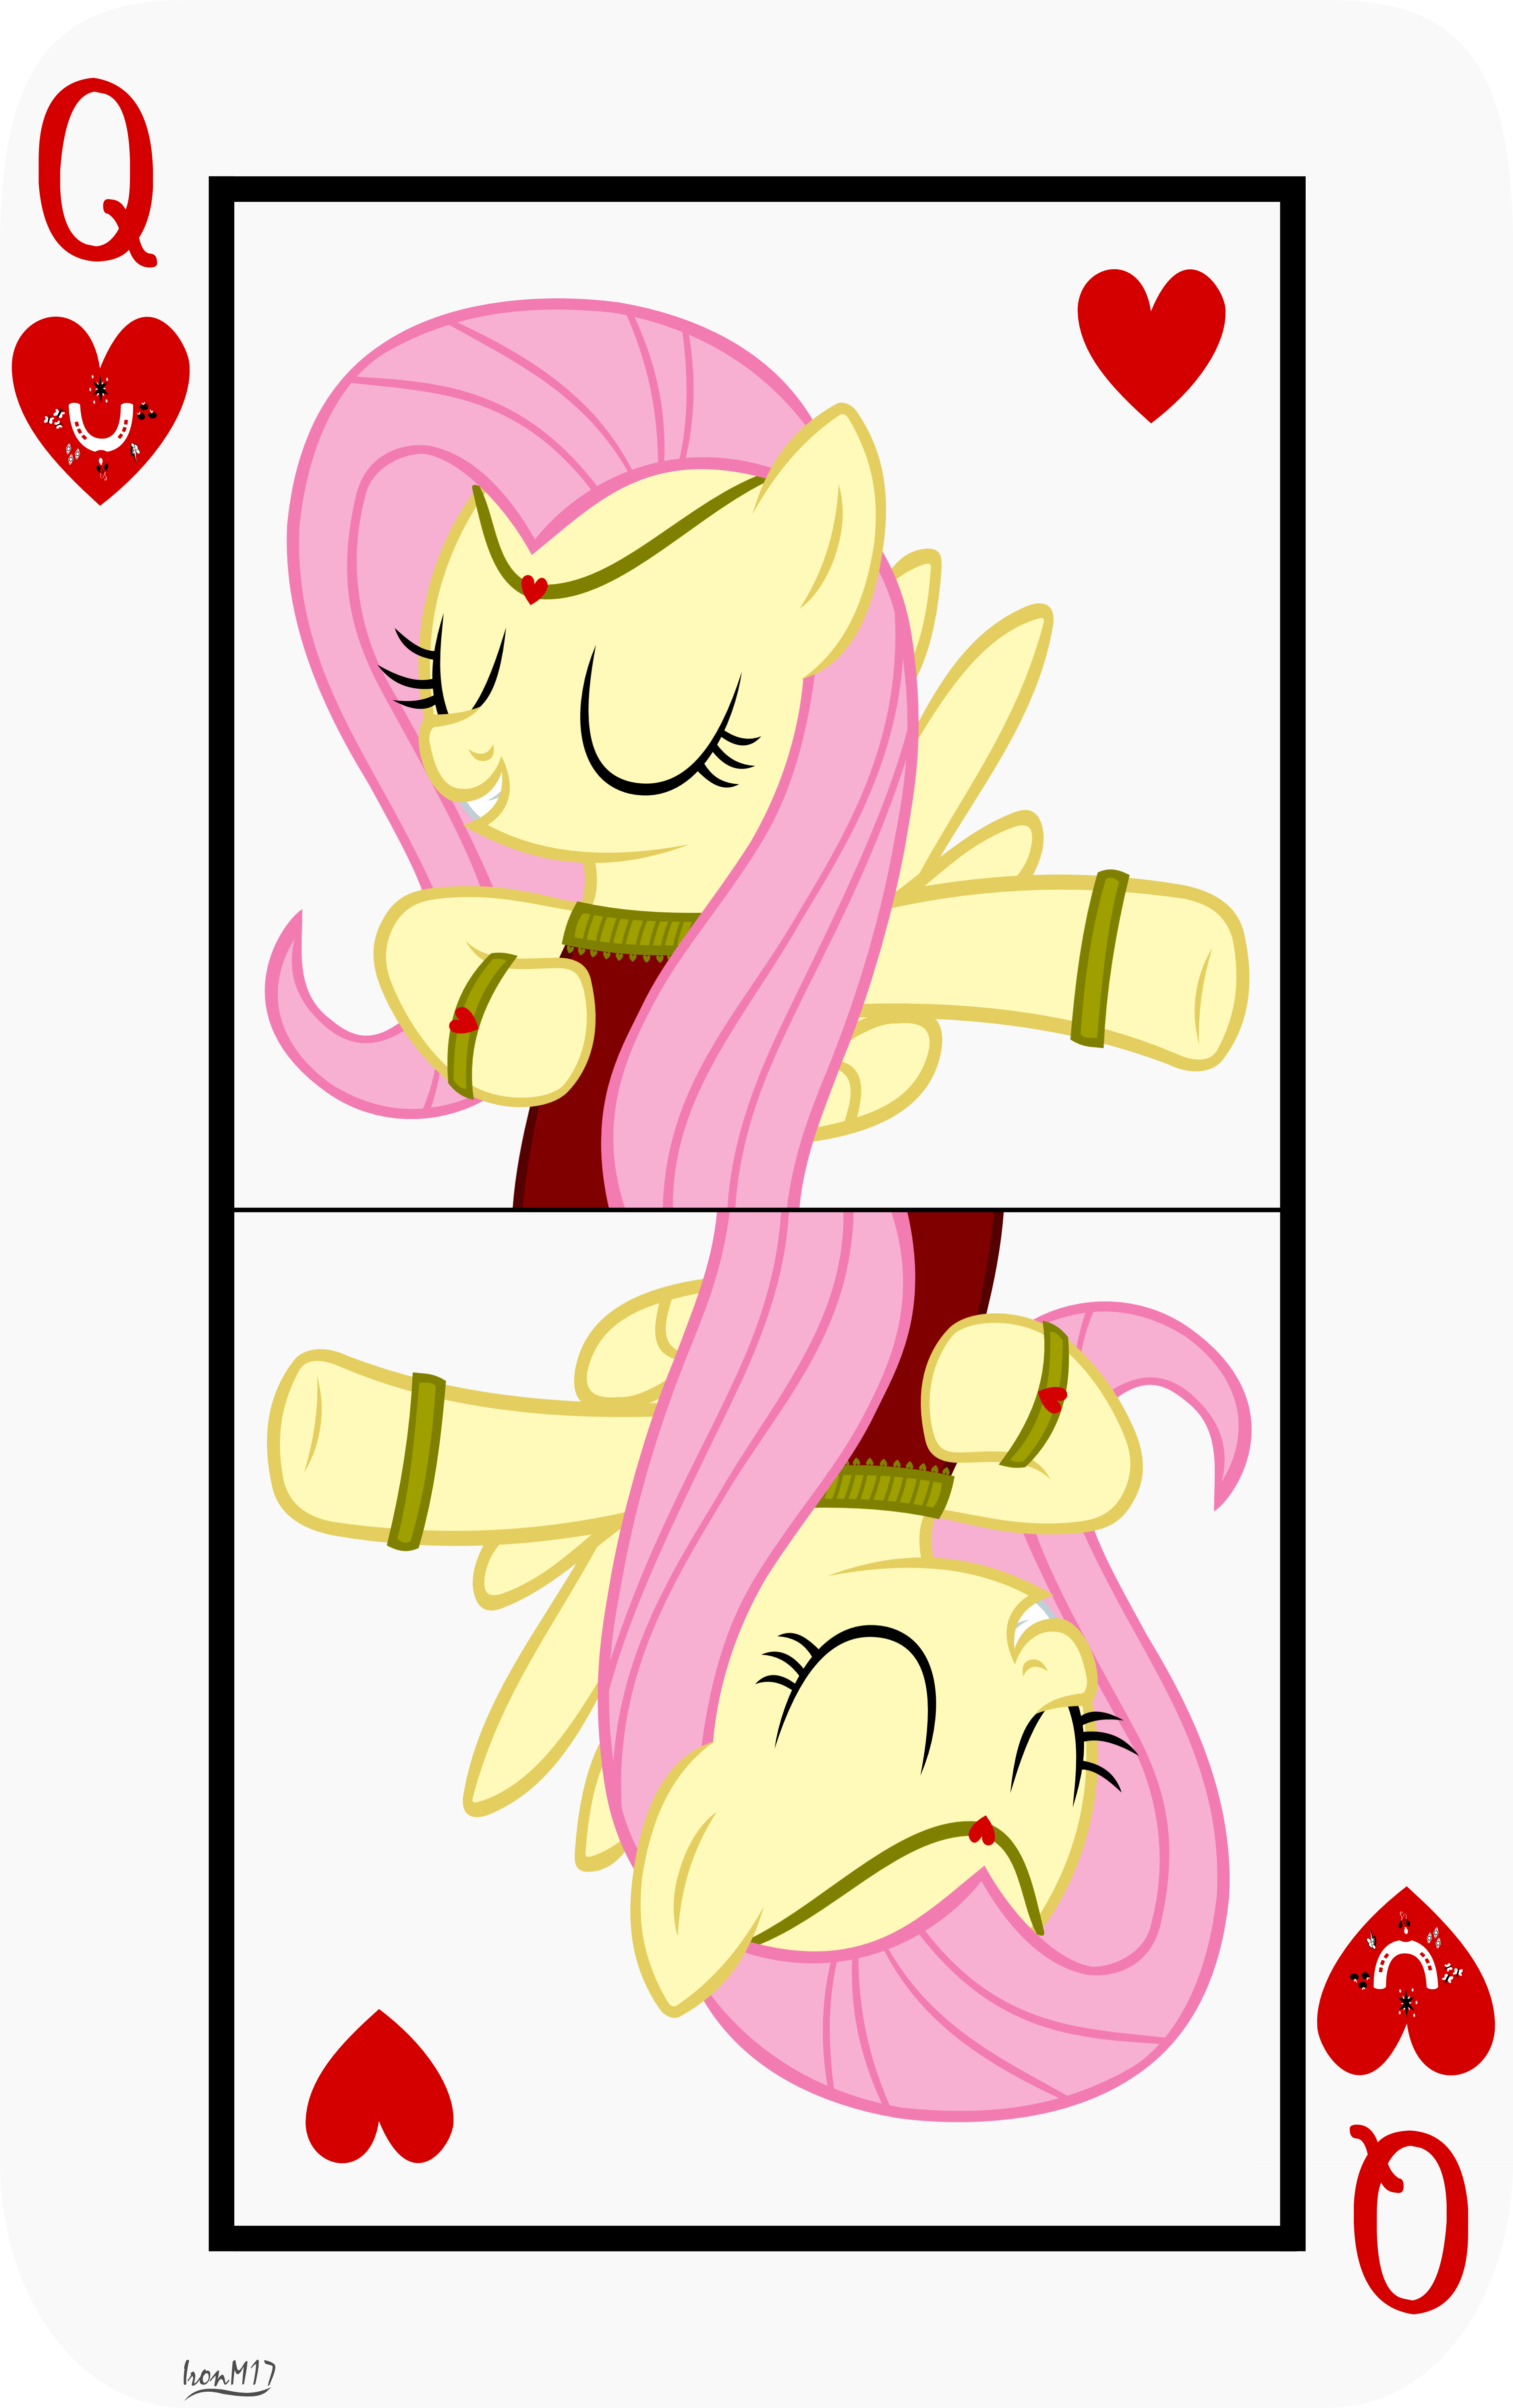 queen_fluttershy_of_hearts_by_ironm17-db